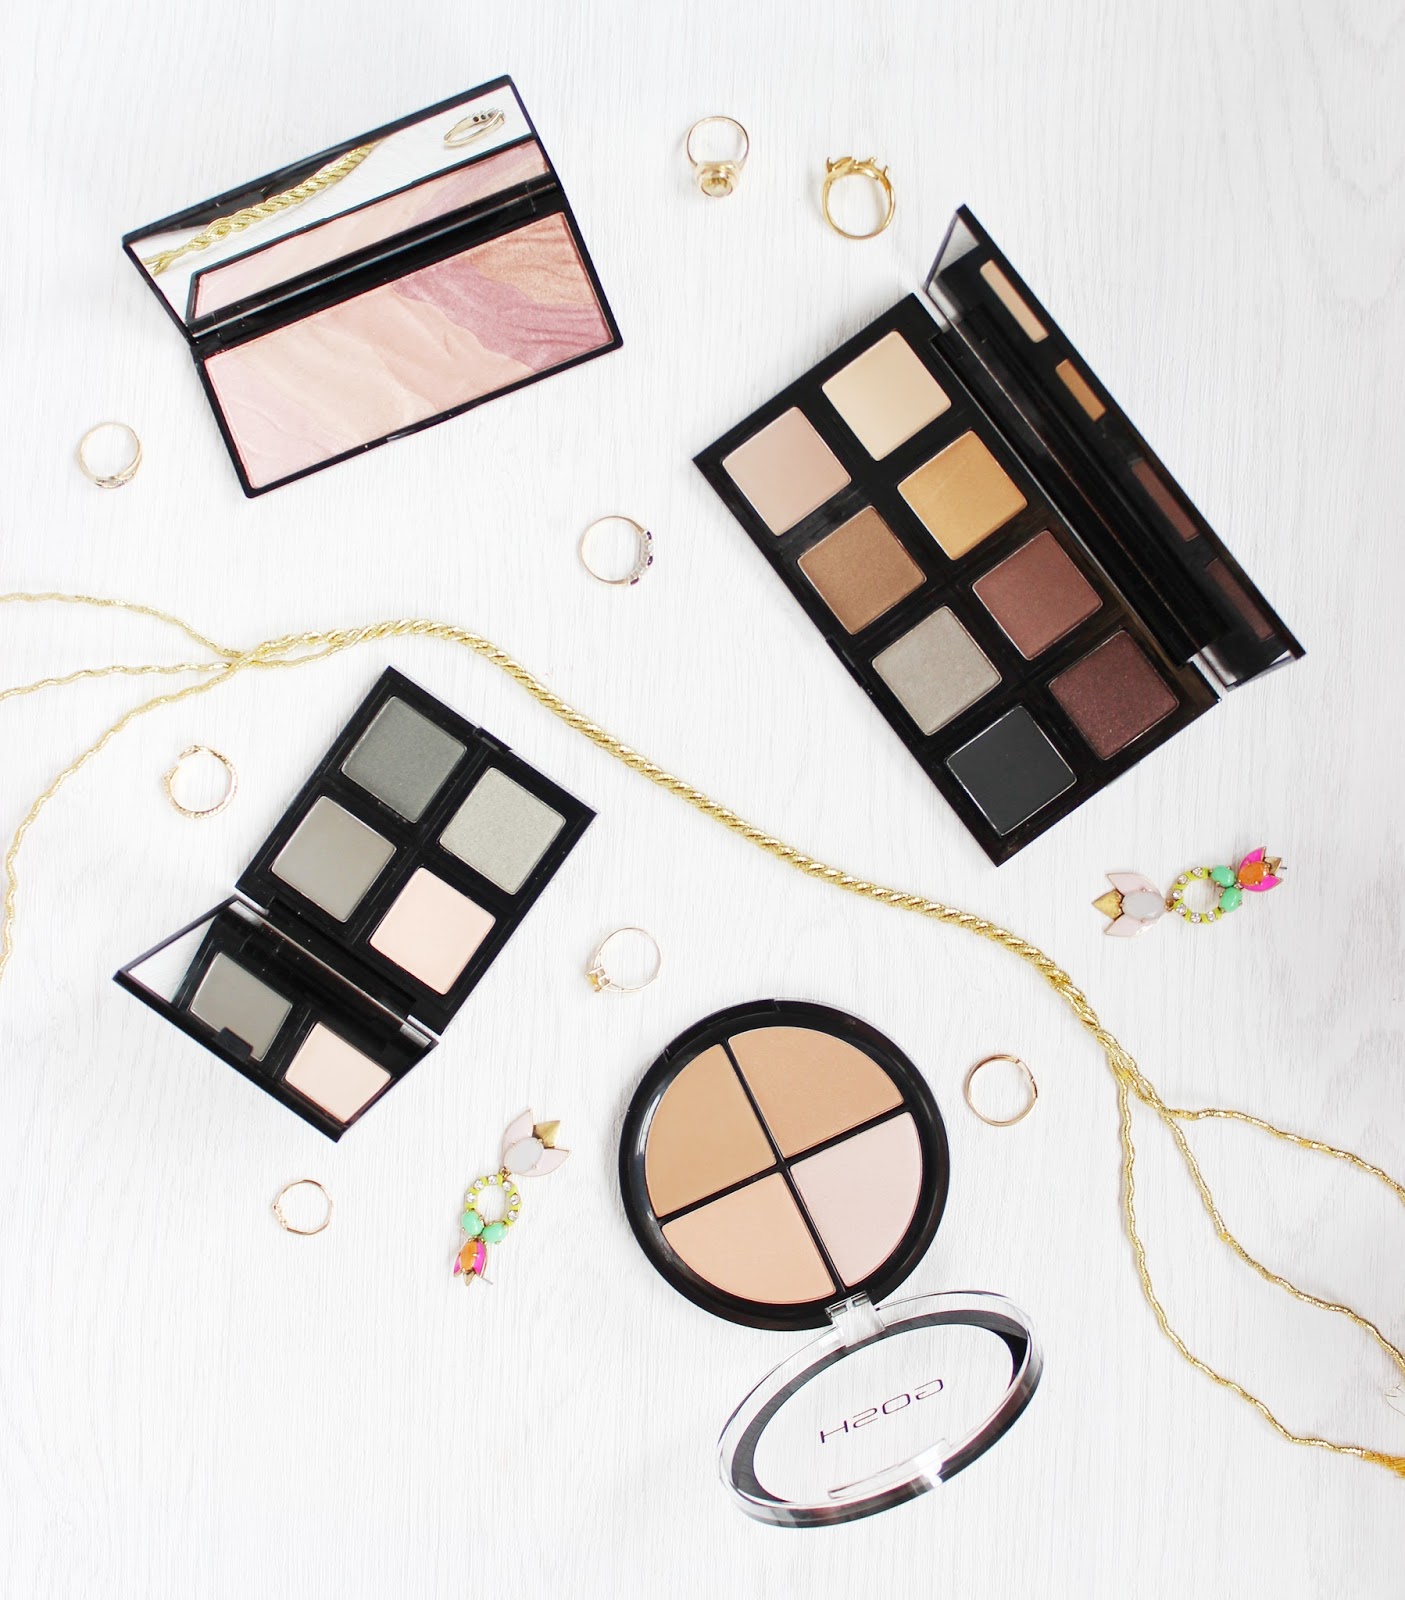 Must-have high street palettes from GOSH, The Body Shop and MUA